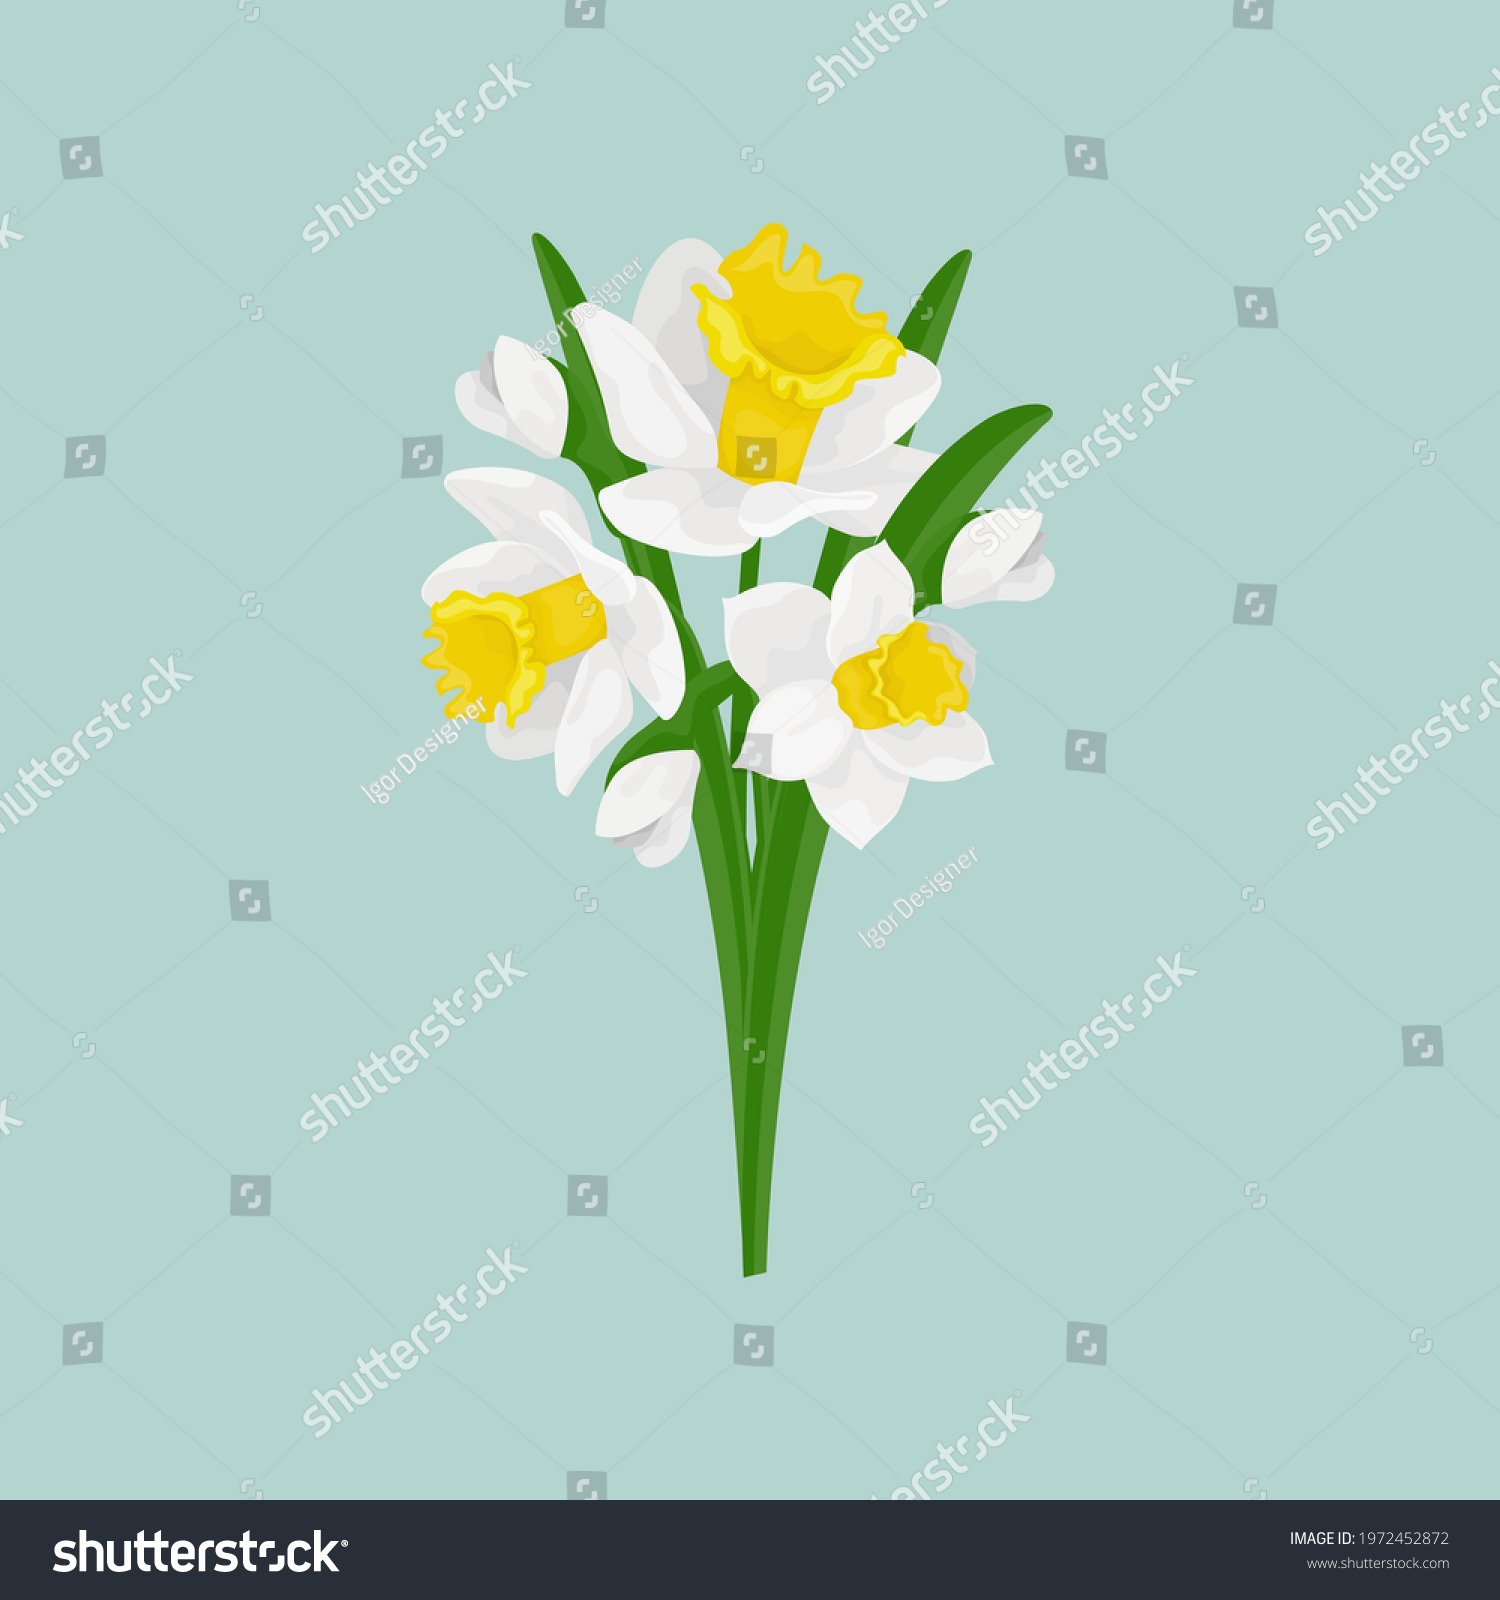 SVG of Daffodils bouquet. Vector illustration isolated on blue. svg